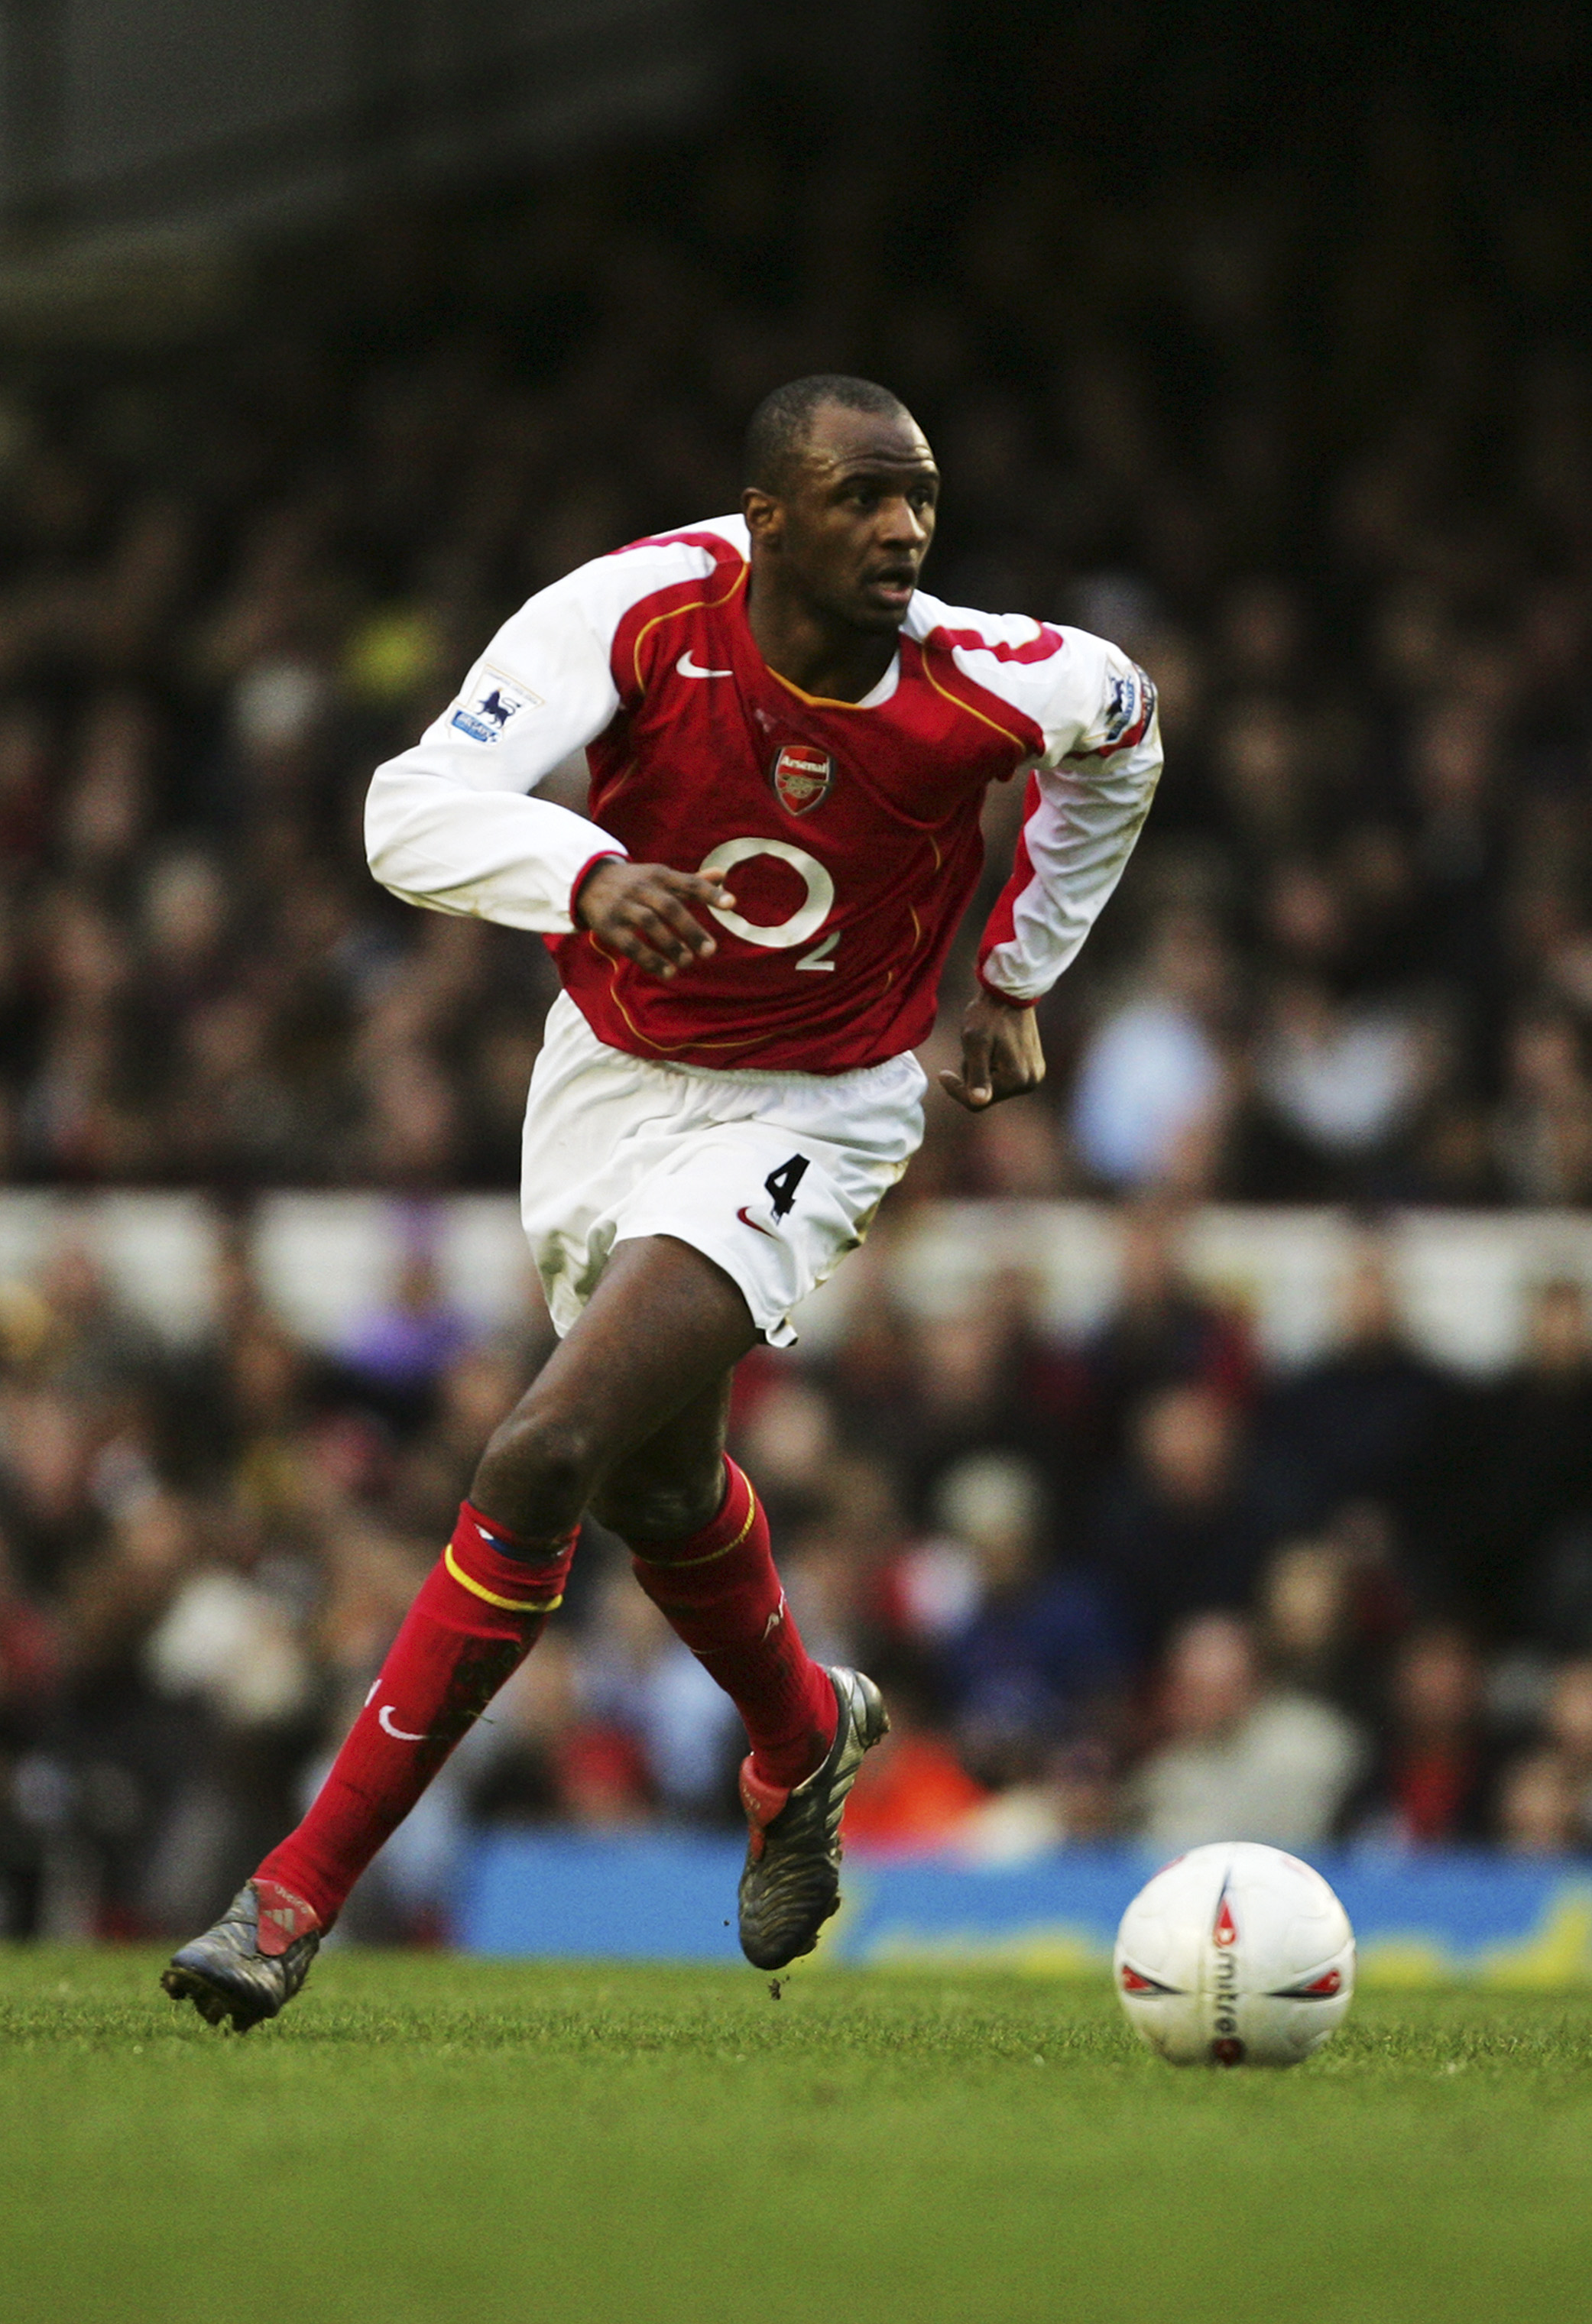 LONDON ENGLAND, JANUARY 29. Patrick Vieira of Arsenal in action during the FA Cup Fourth Round match between Arsenal and Wolverhampton Wanderers at Highbury on January 29, 2005 in London, England.